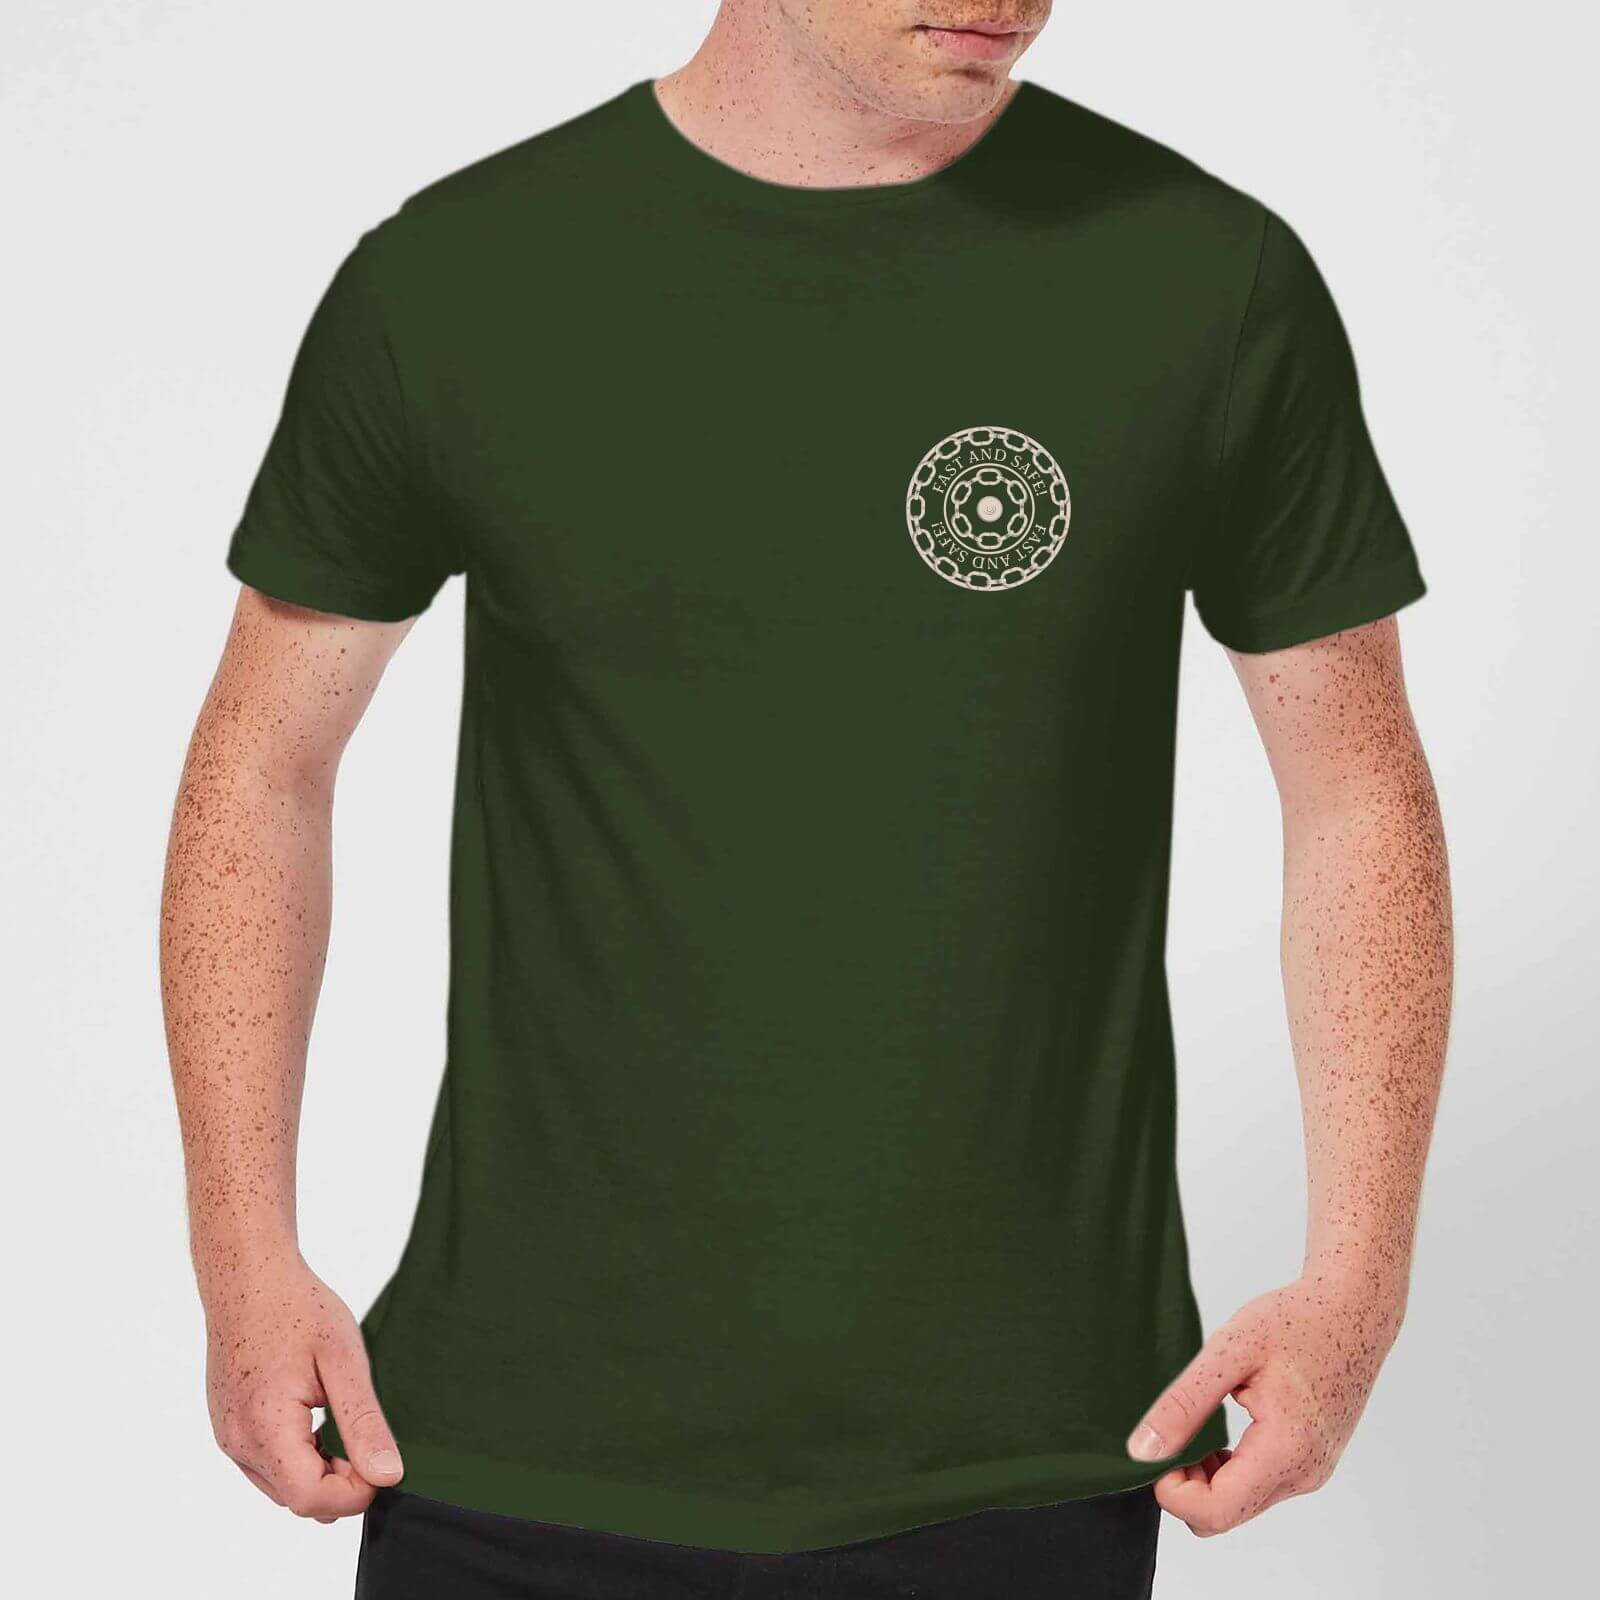 Crystal Maze Fast And Safe Pocket Men's T-Shirt - Forest Green - S - Forest Green